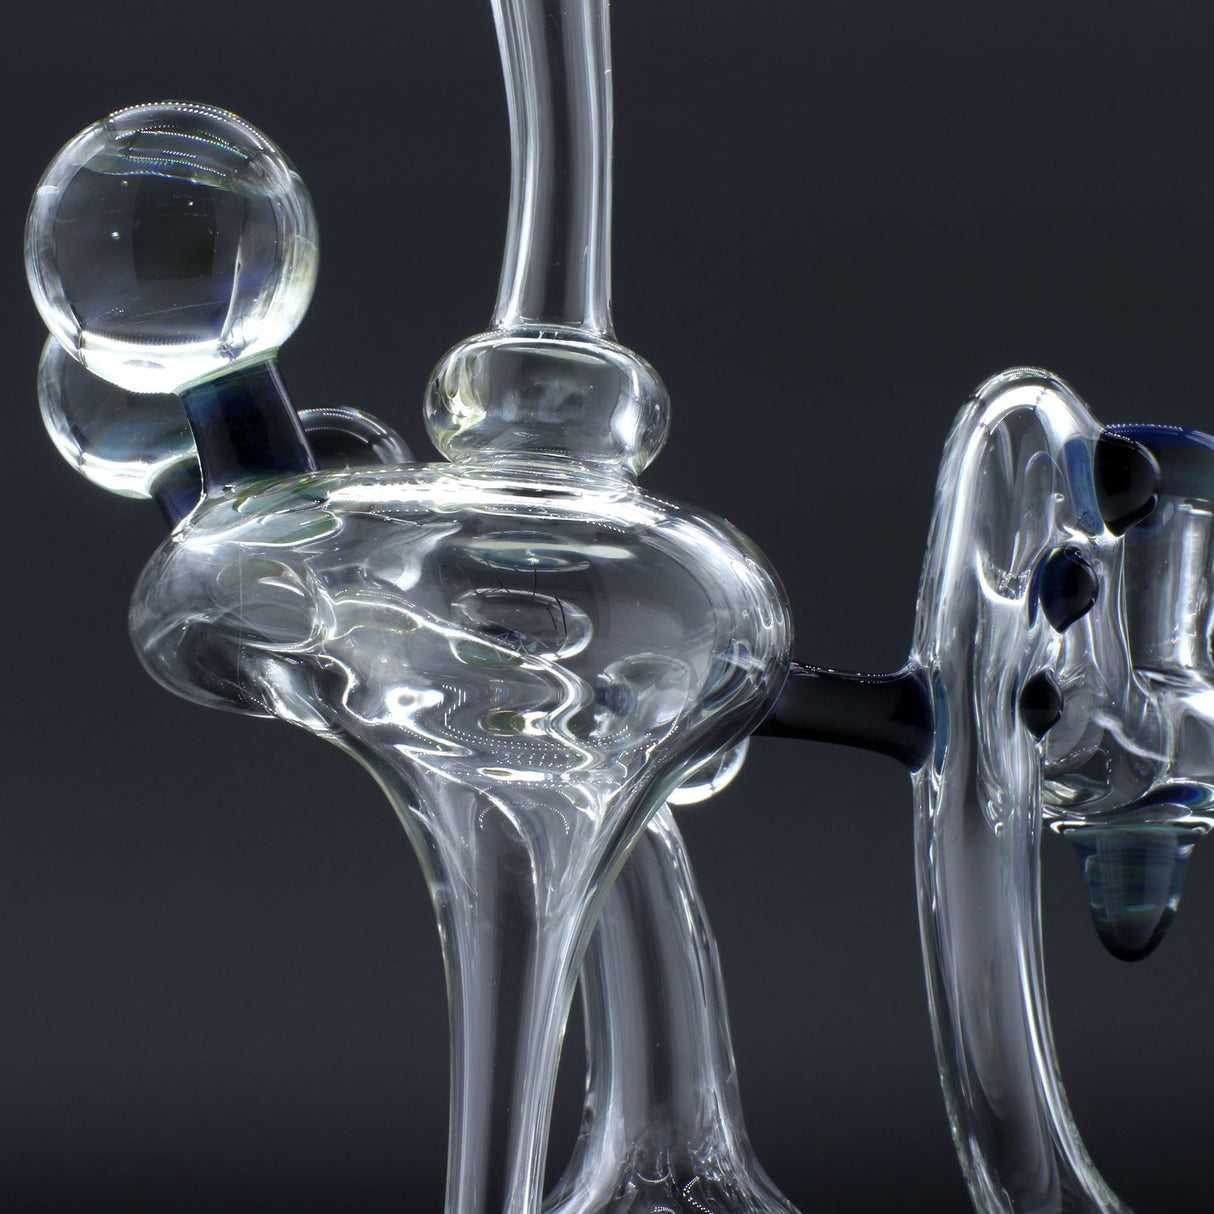 Clayball Glass "Milky Way" Heady Recycler Dab-Rig Close-Up with Intricate Glasswork